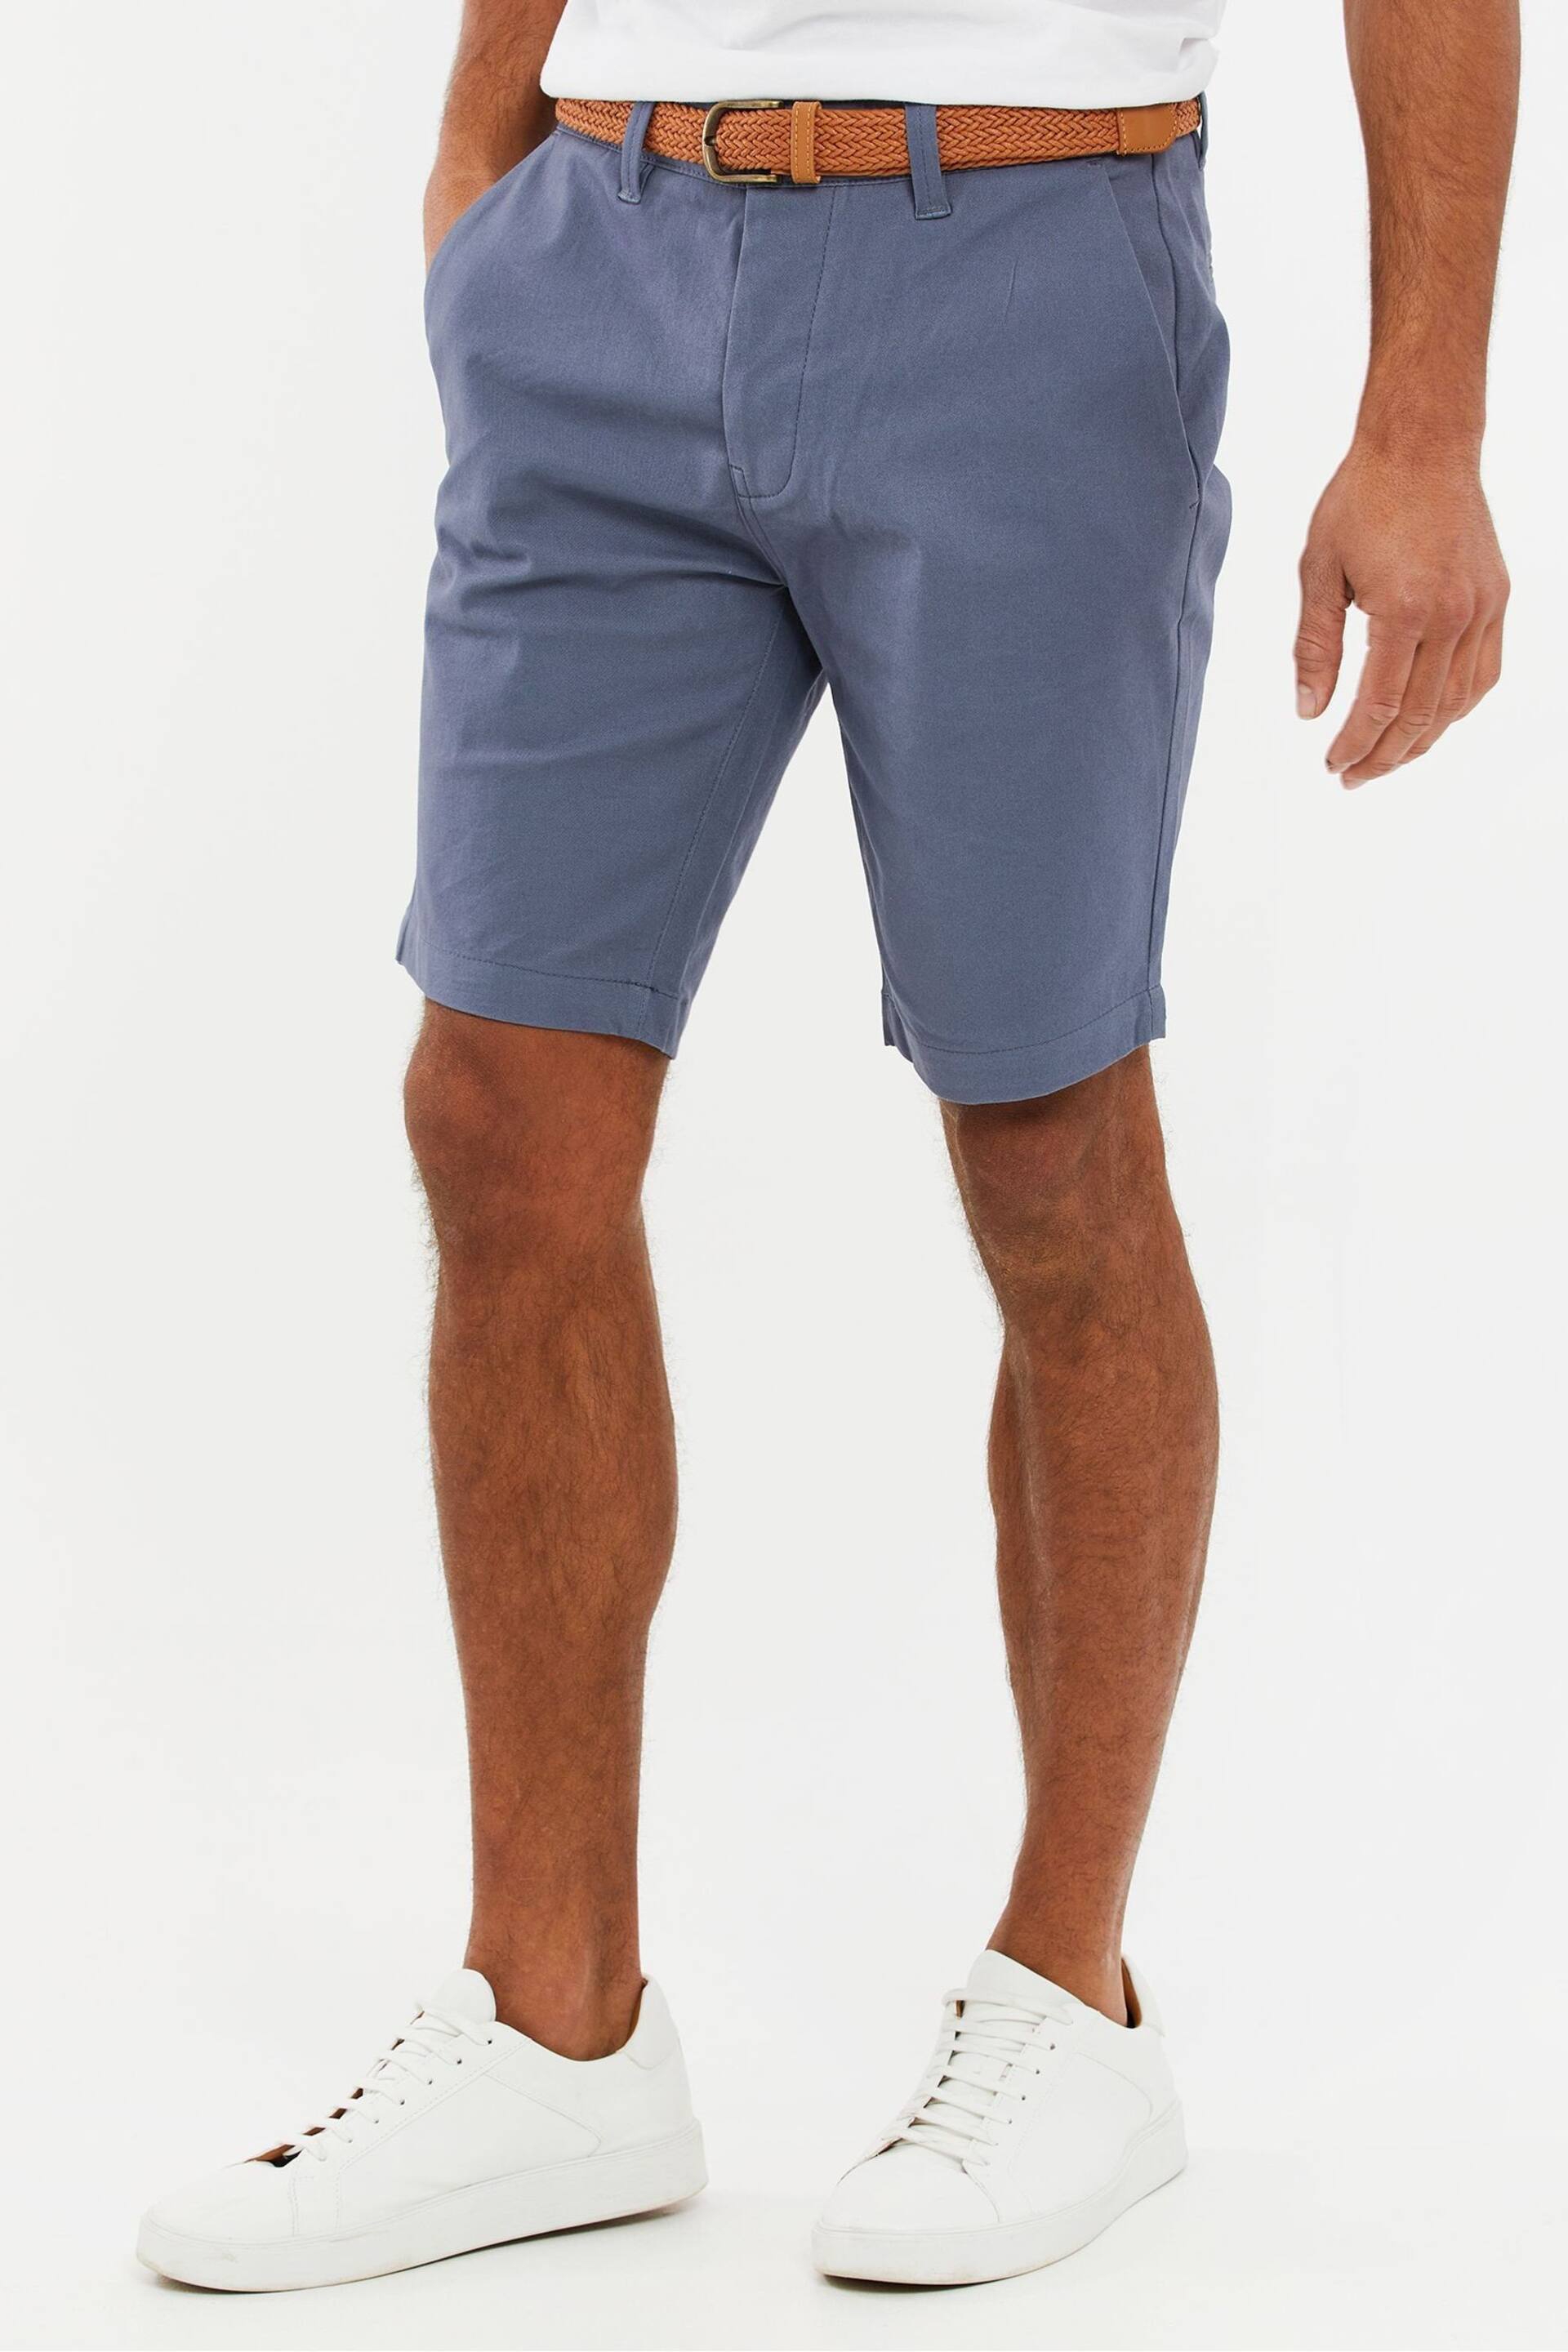 Threadbare Blue Cotton Stretch Turn-Up Chino Shorts with Woven Belt - Image 1 of 4